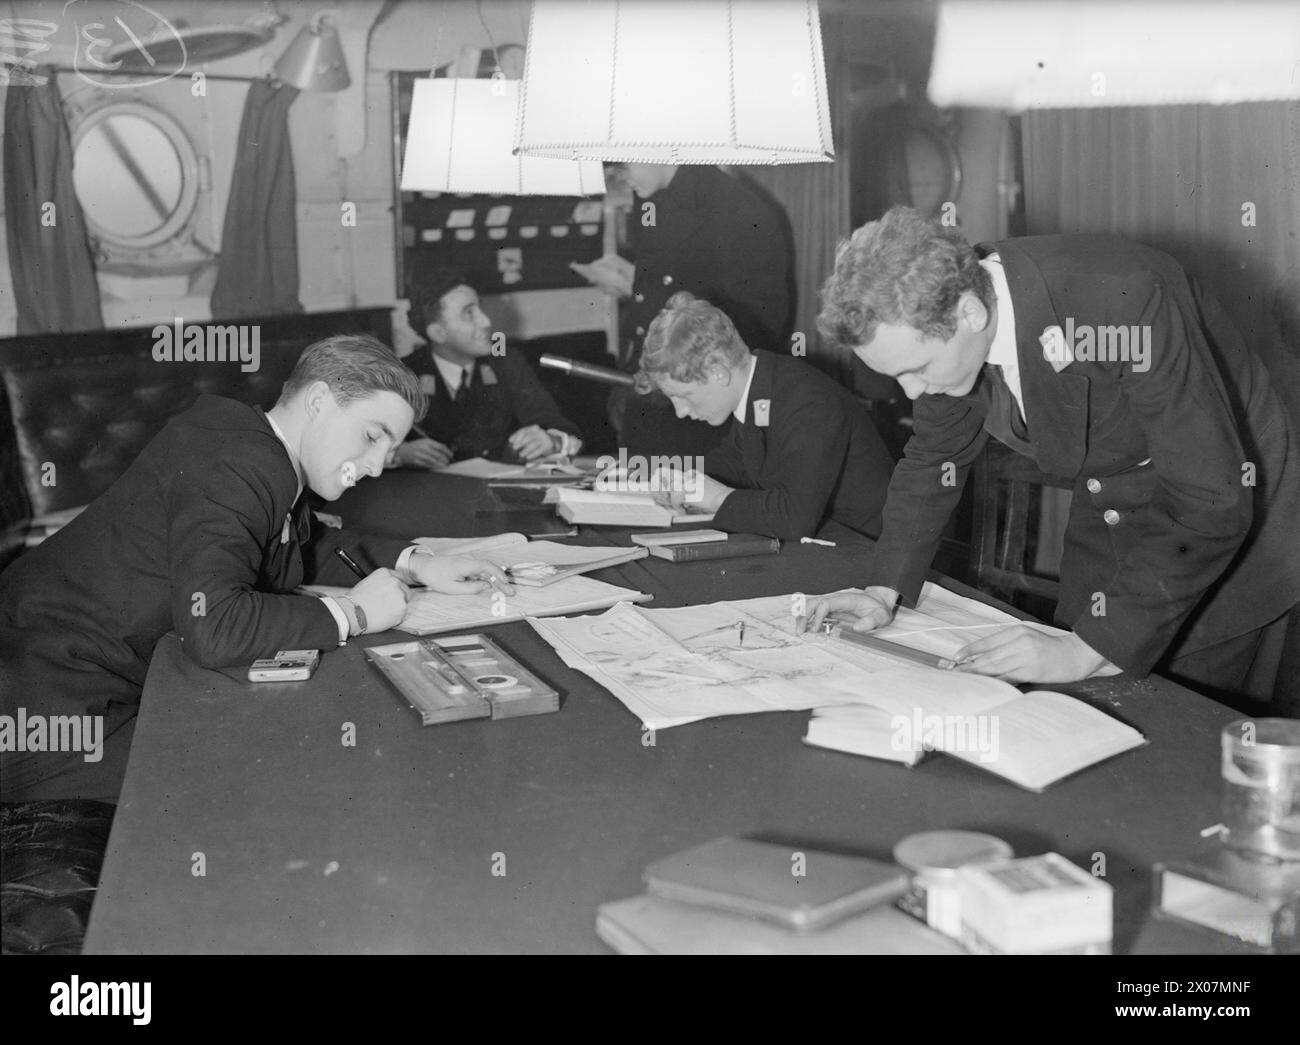 'MIDDIES' OF THE ROYAL NAVY. 3, 14 AND 18 JANUARY 1943, ABOARD HMS MALAYA, AT SCAPA FLOW. LIFE ABOARD FOR THE MIDSHIPMEN OF THE ROYAL NAVY; JUNIOR NAVAL OFFICERS WHO HAVE HAD A COURSE AT A NAVAL COLLEGE AND ARE STILL STUDYING THE THEORY AND PRACTICE OF SEAMANSHIP. - Midshipmen studying between watches in the gun room Stock Photo